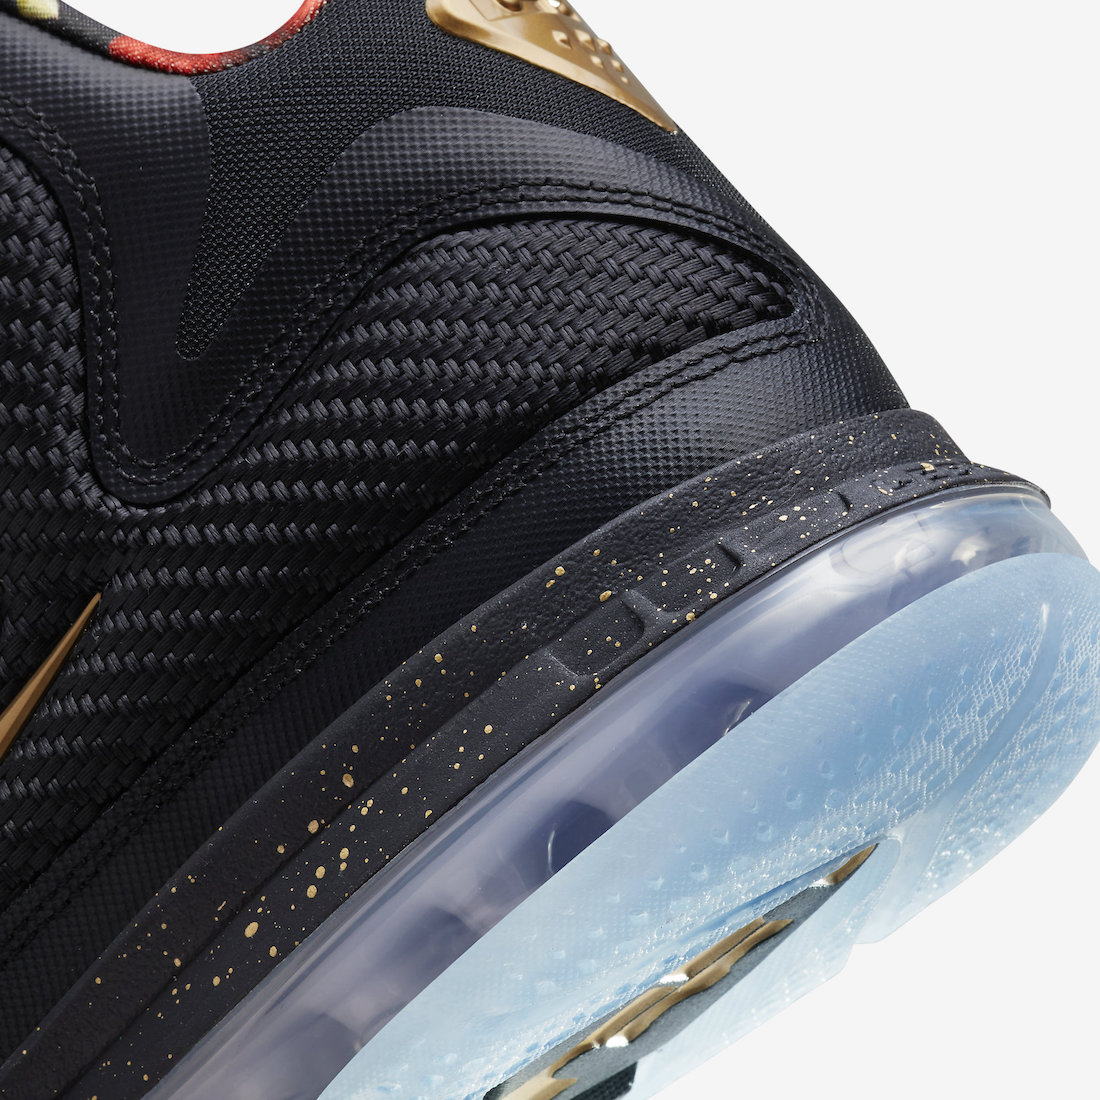 Nike-LeBron-9-Watch-The-Throne-DO9353-001-Release-Date-7